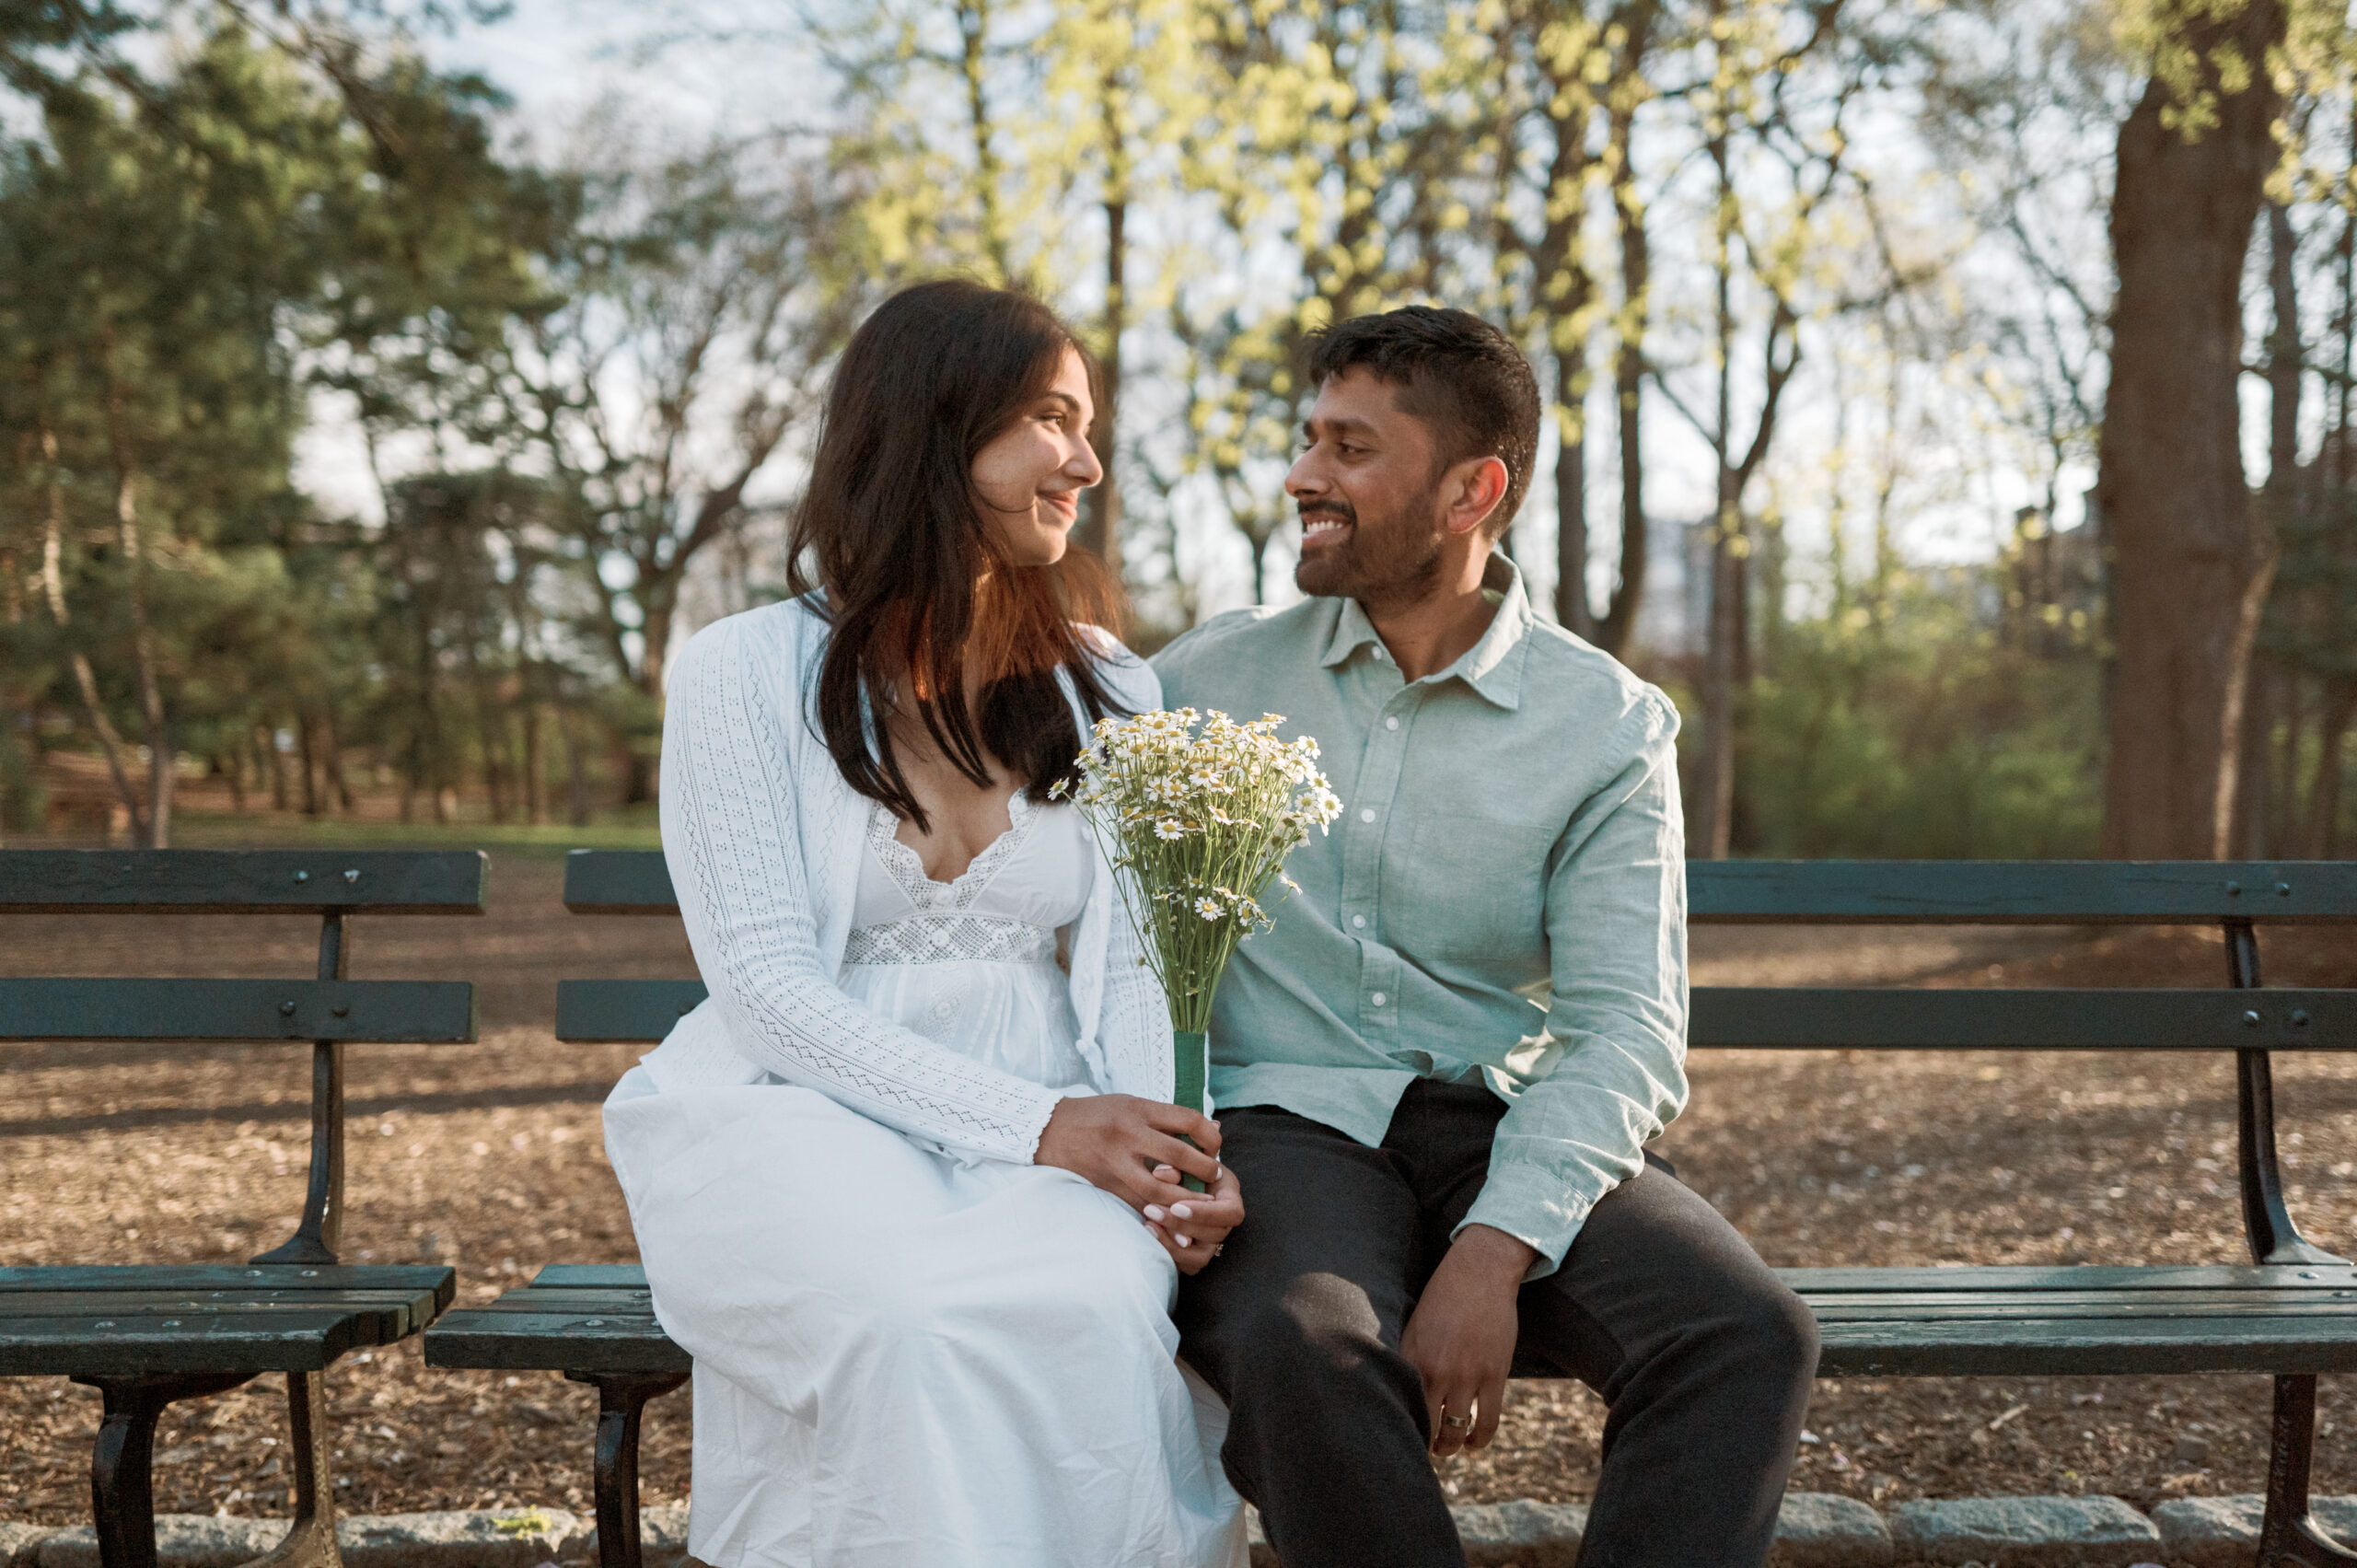 The engaged couple are looking into each other's eyes while sitting on a bench in a park outdoors. Engagement sessions image by Jenny Fu Studio